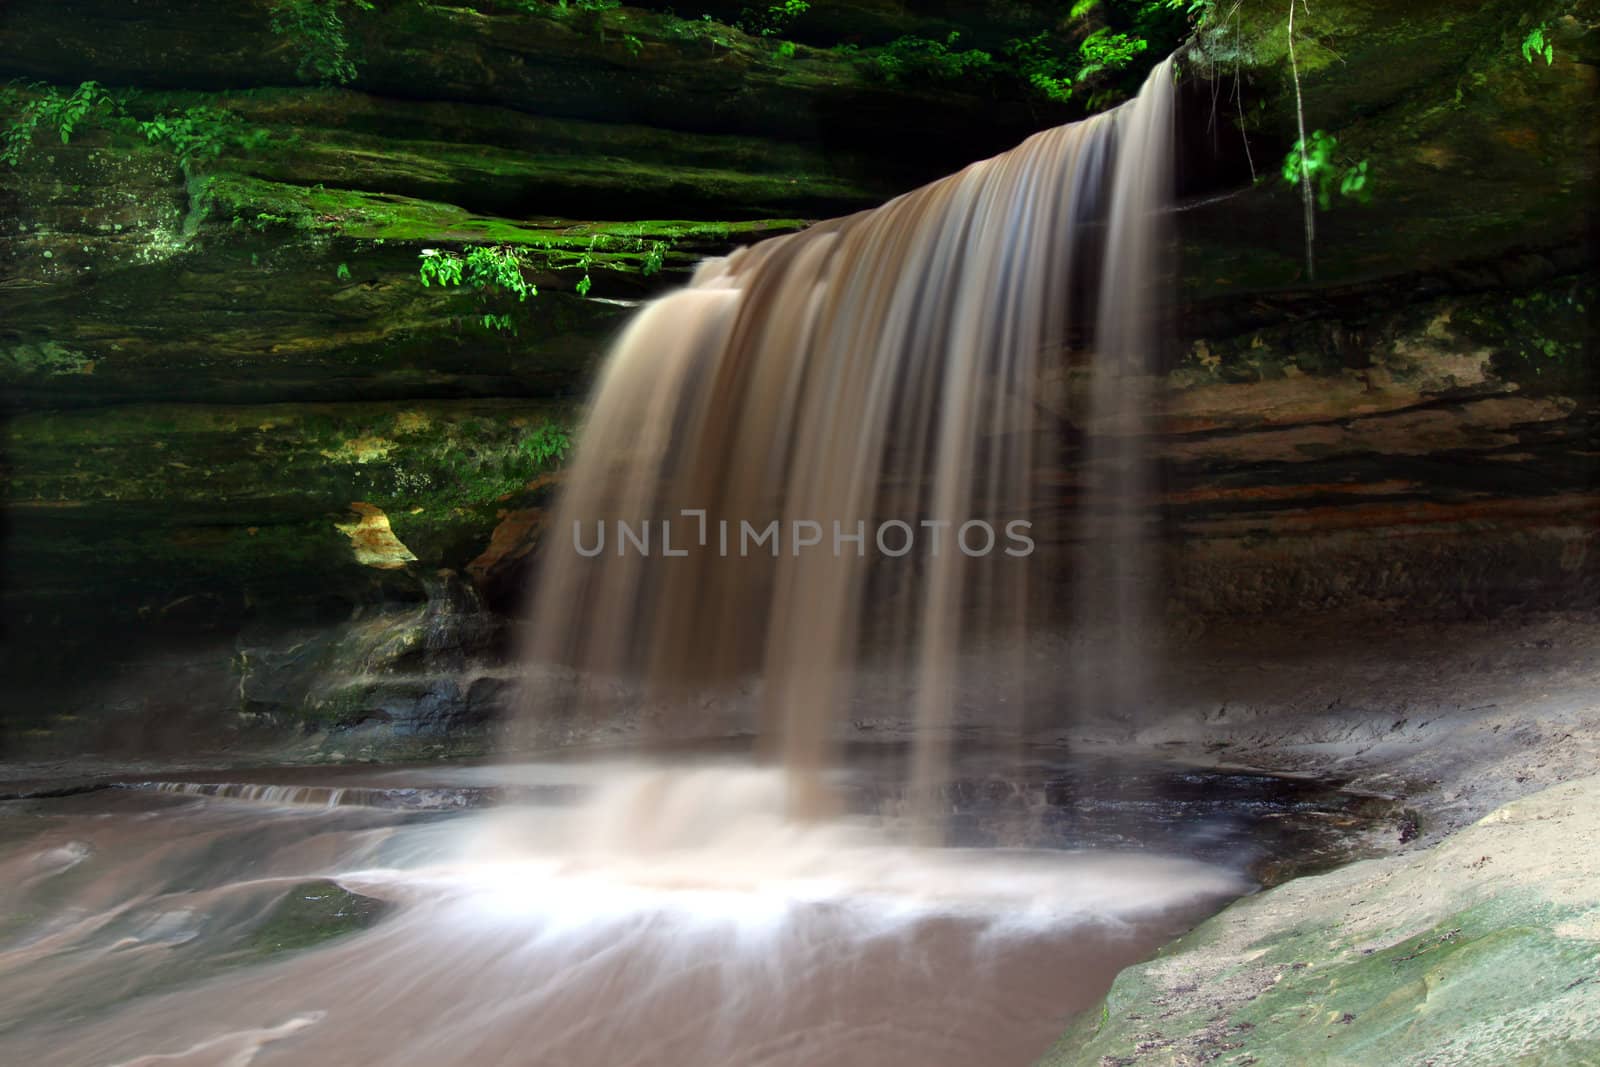 Lasalle Falls cuts through a canyon at Starved Rock State Park in central Illinois.